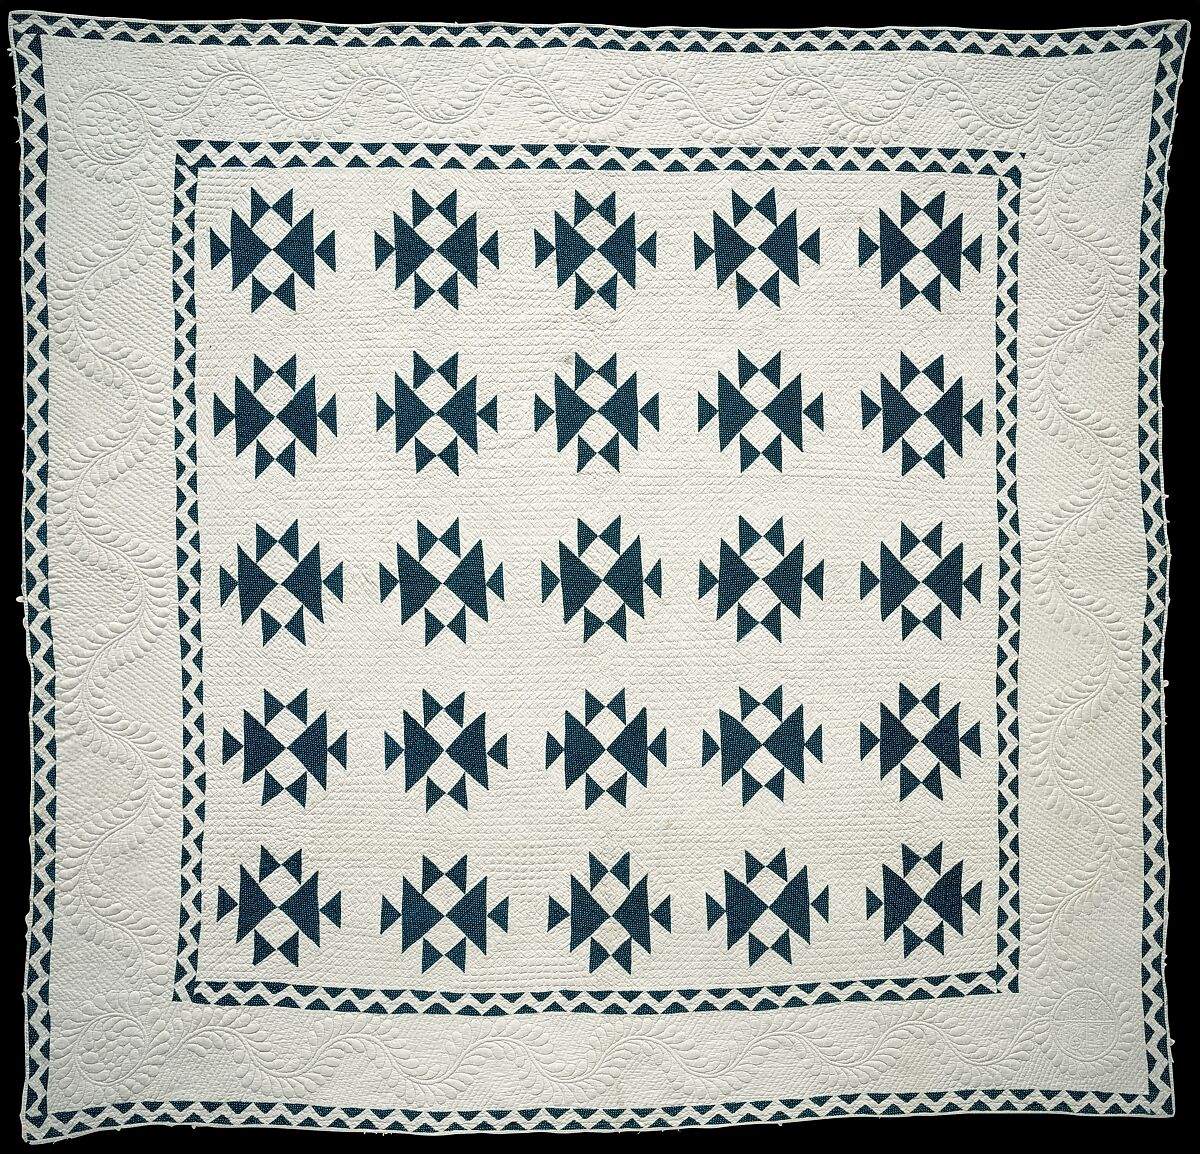 Quilt, Double X pattern, Cotton, American 